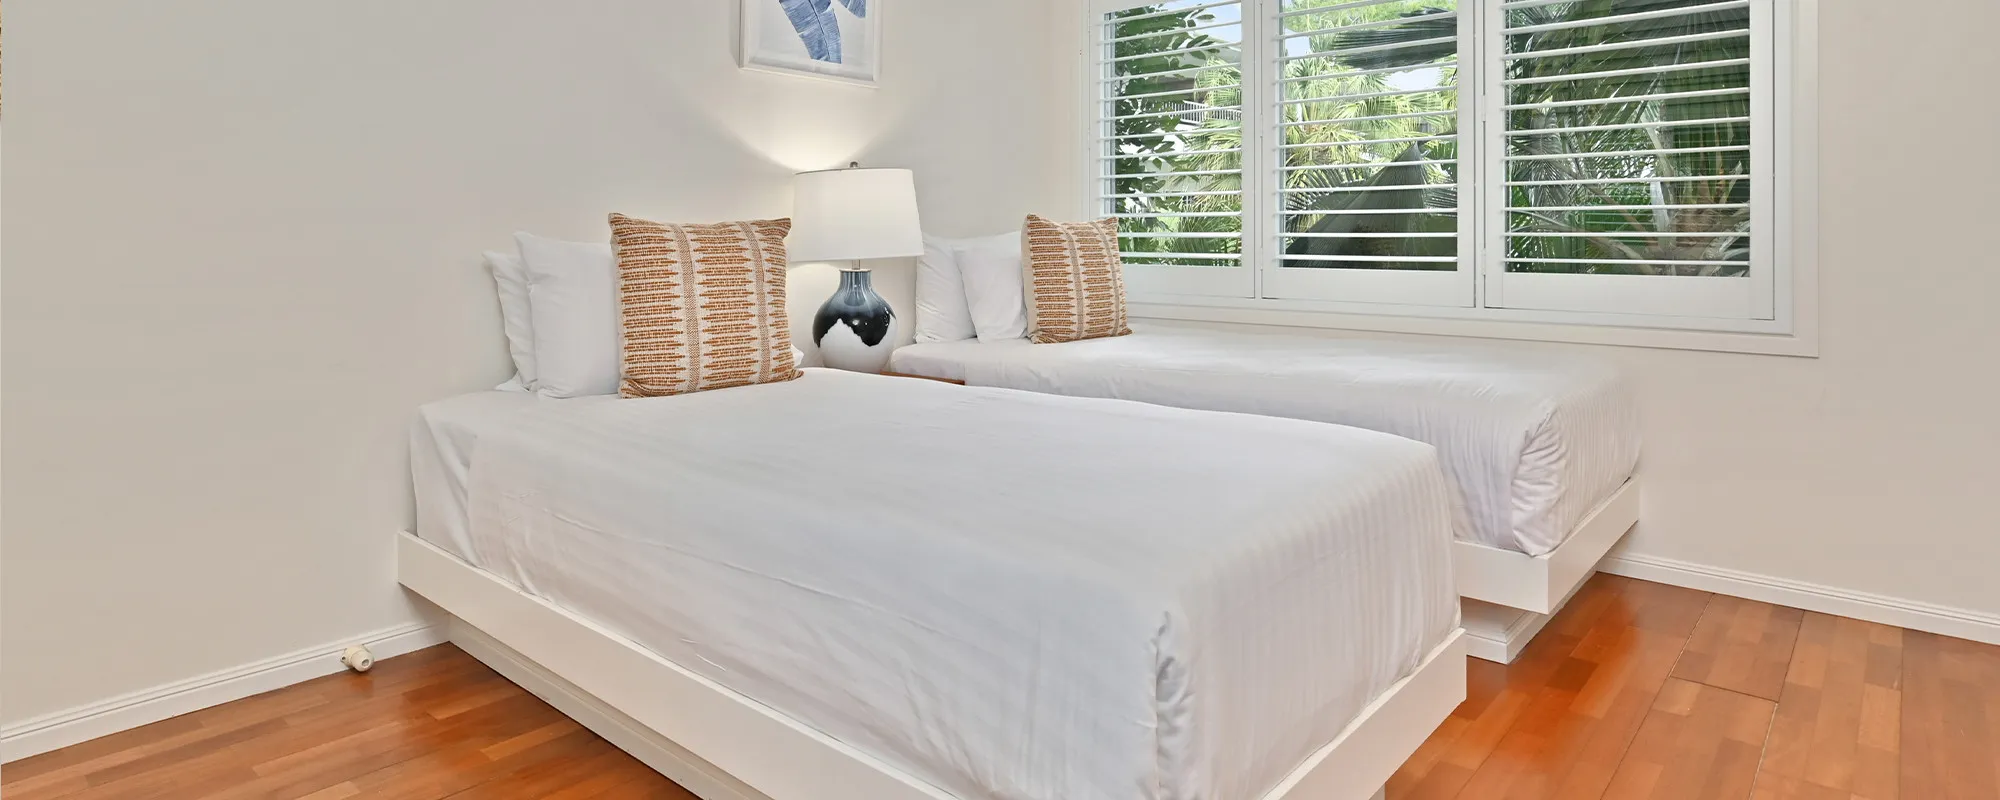 Alamanda Palm Cove by Lancemore Boutique Luxury Accommodation Four Bedroom Apartment 2000 x 800 13